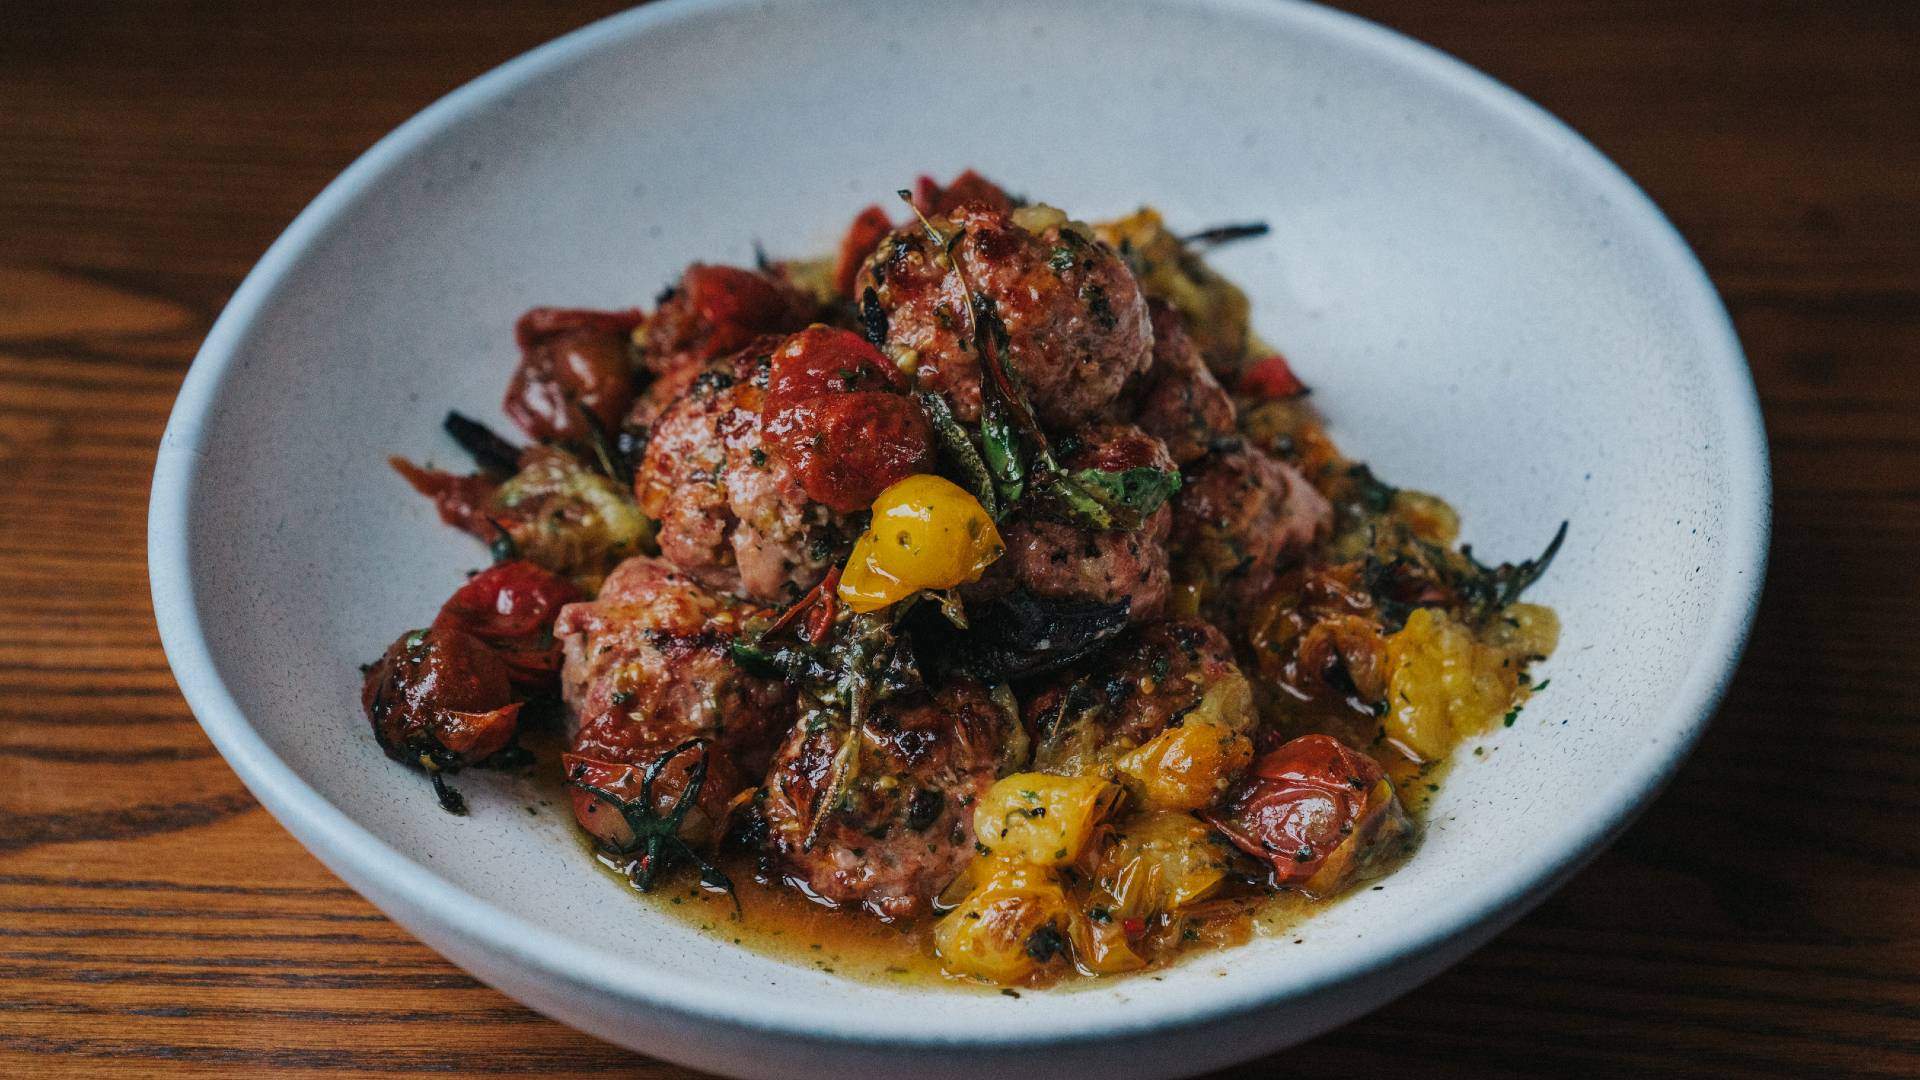 Little Aosta Is Arrowtown's New Rustic Italian Eatery From Celeb Chef Ben Bayly